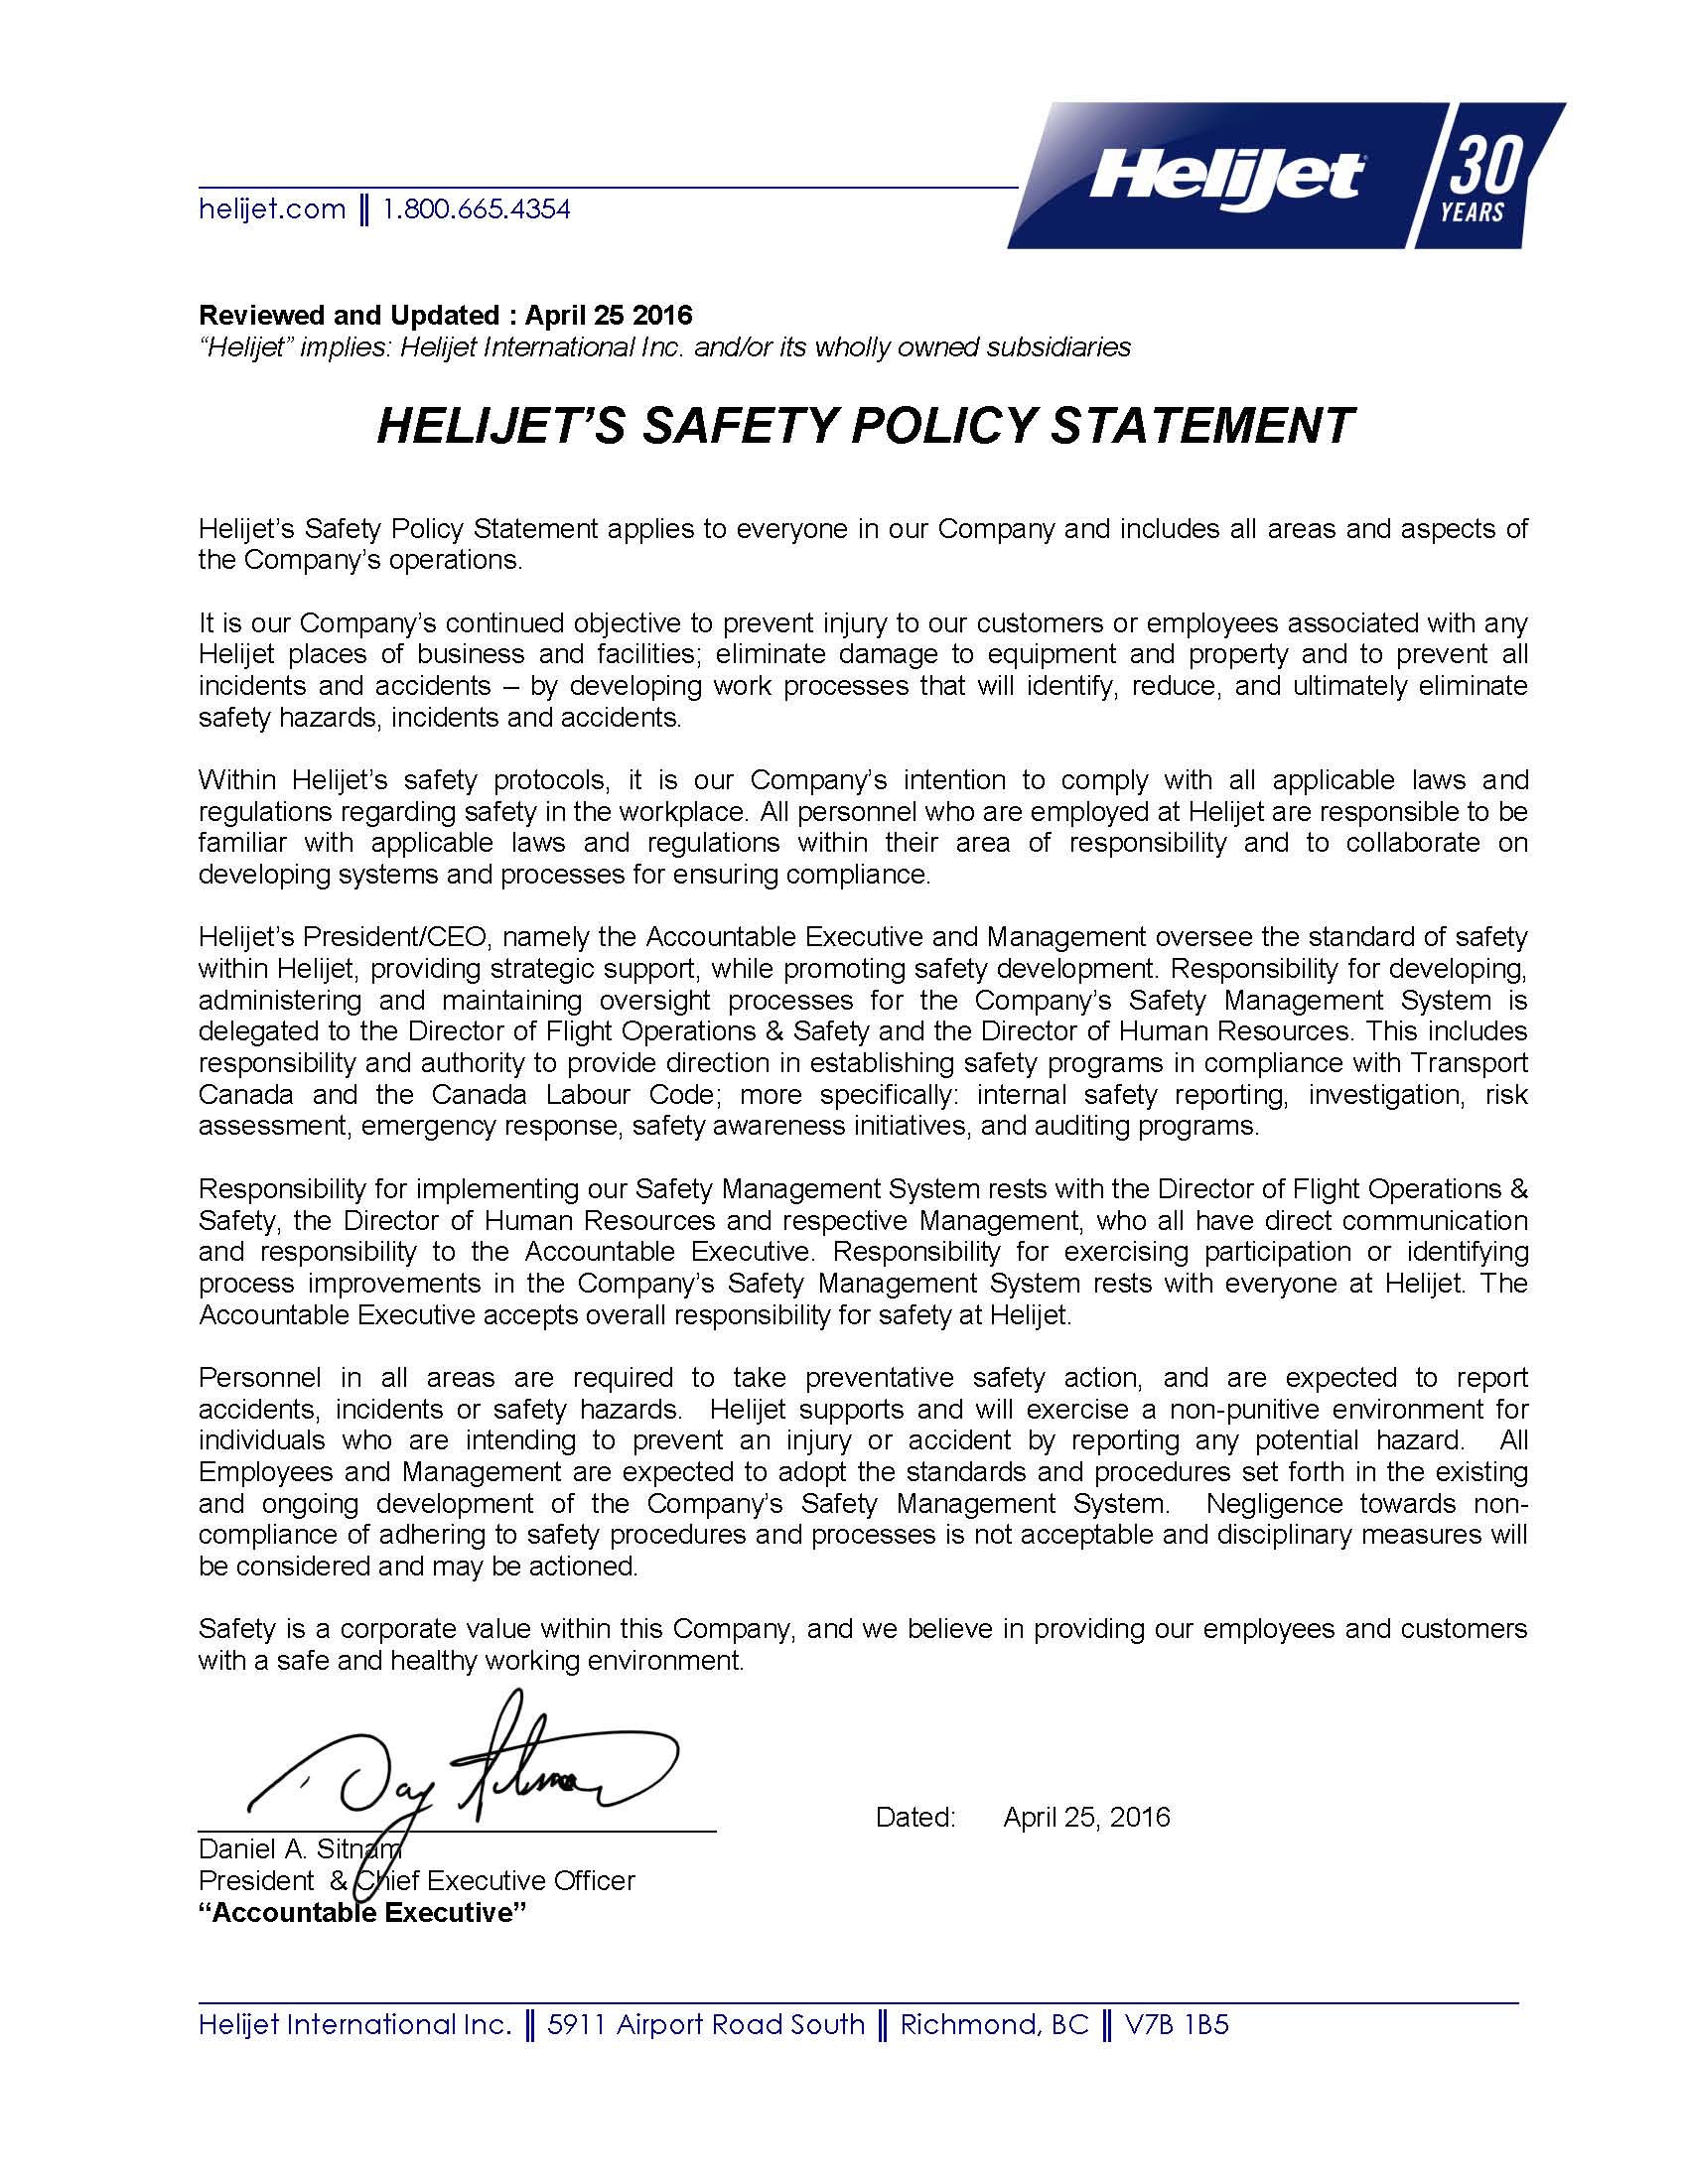 Ceo safety policy statement